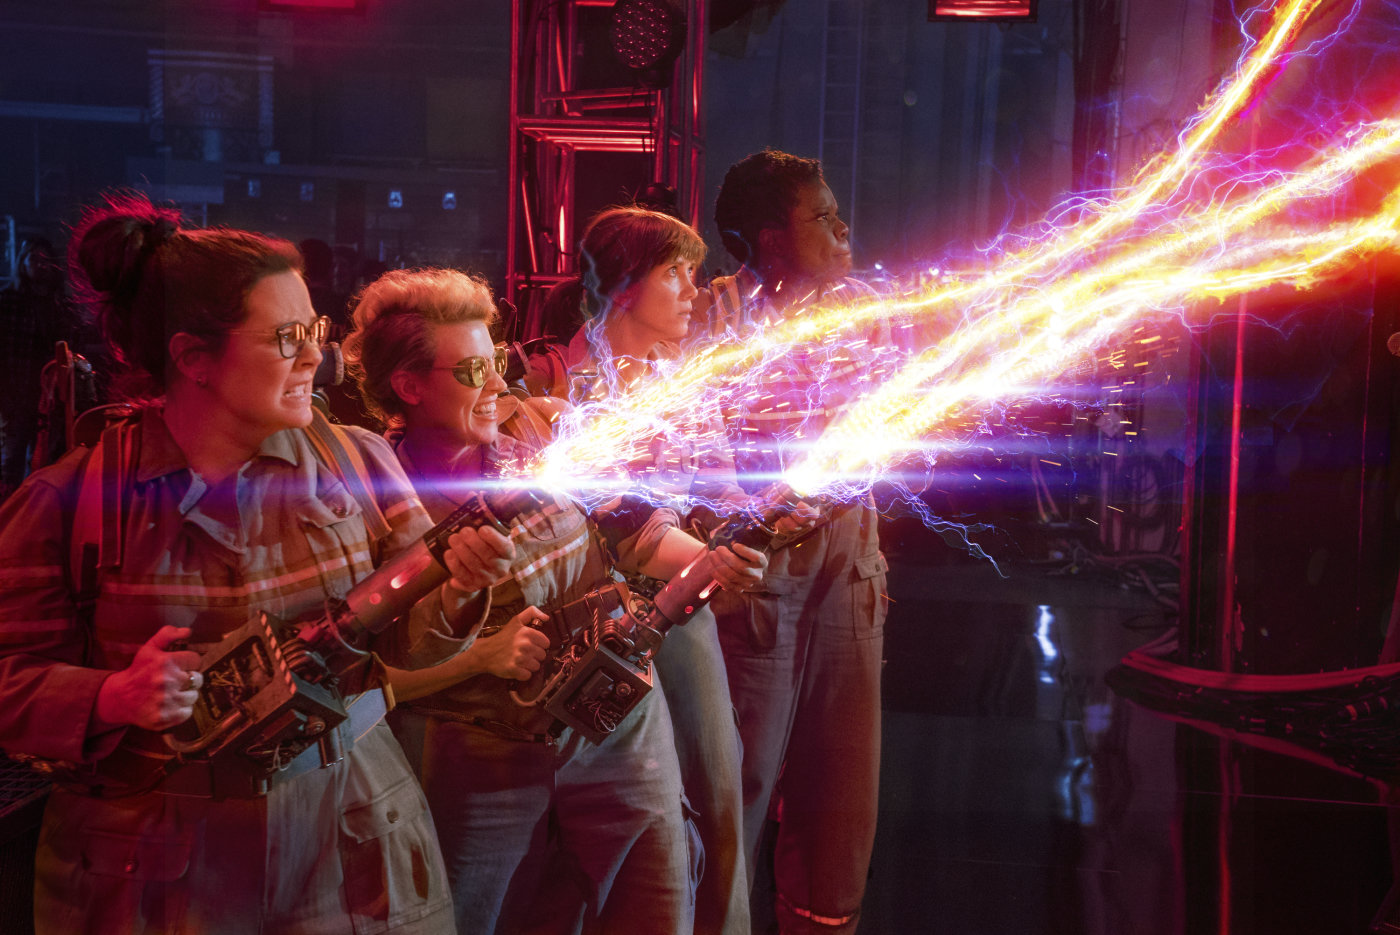 Review Ghostbusters